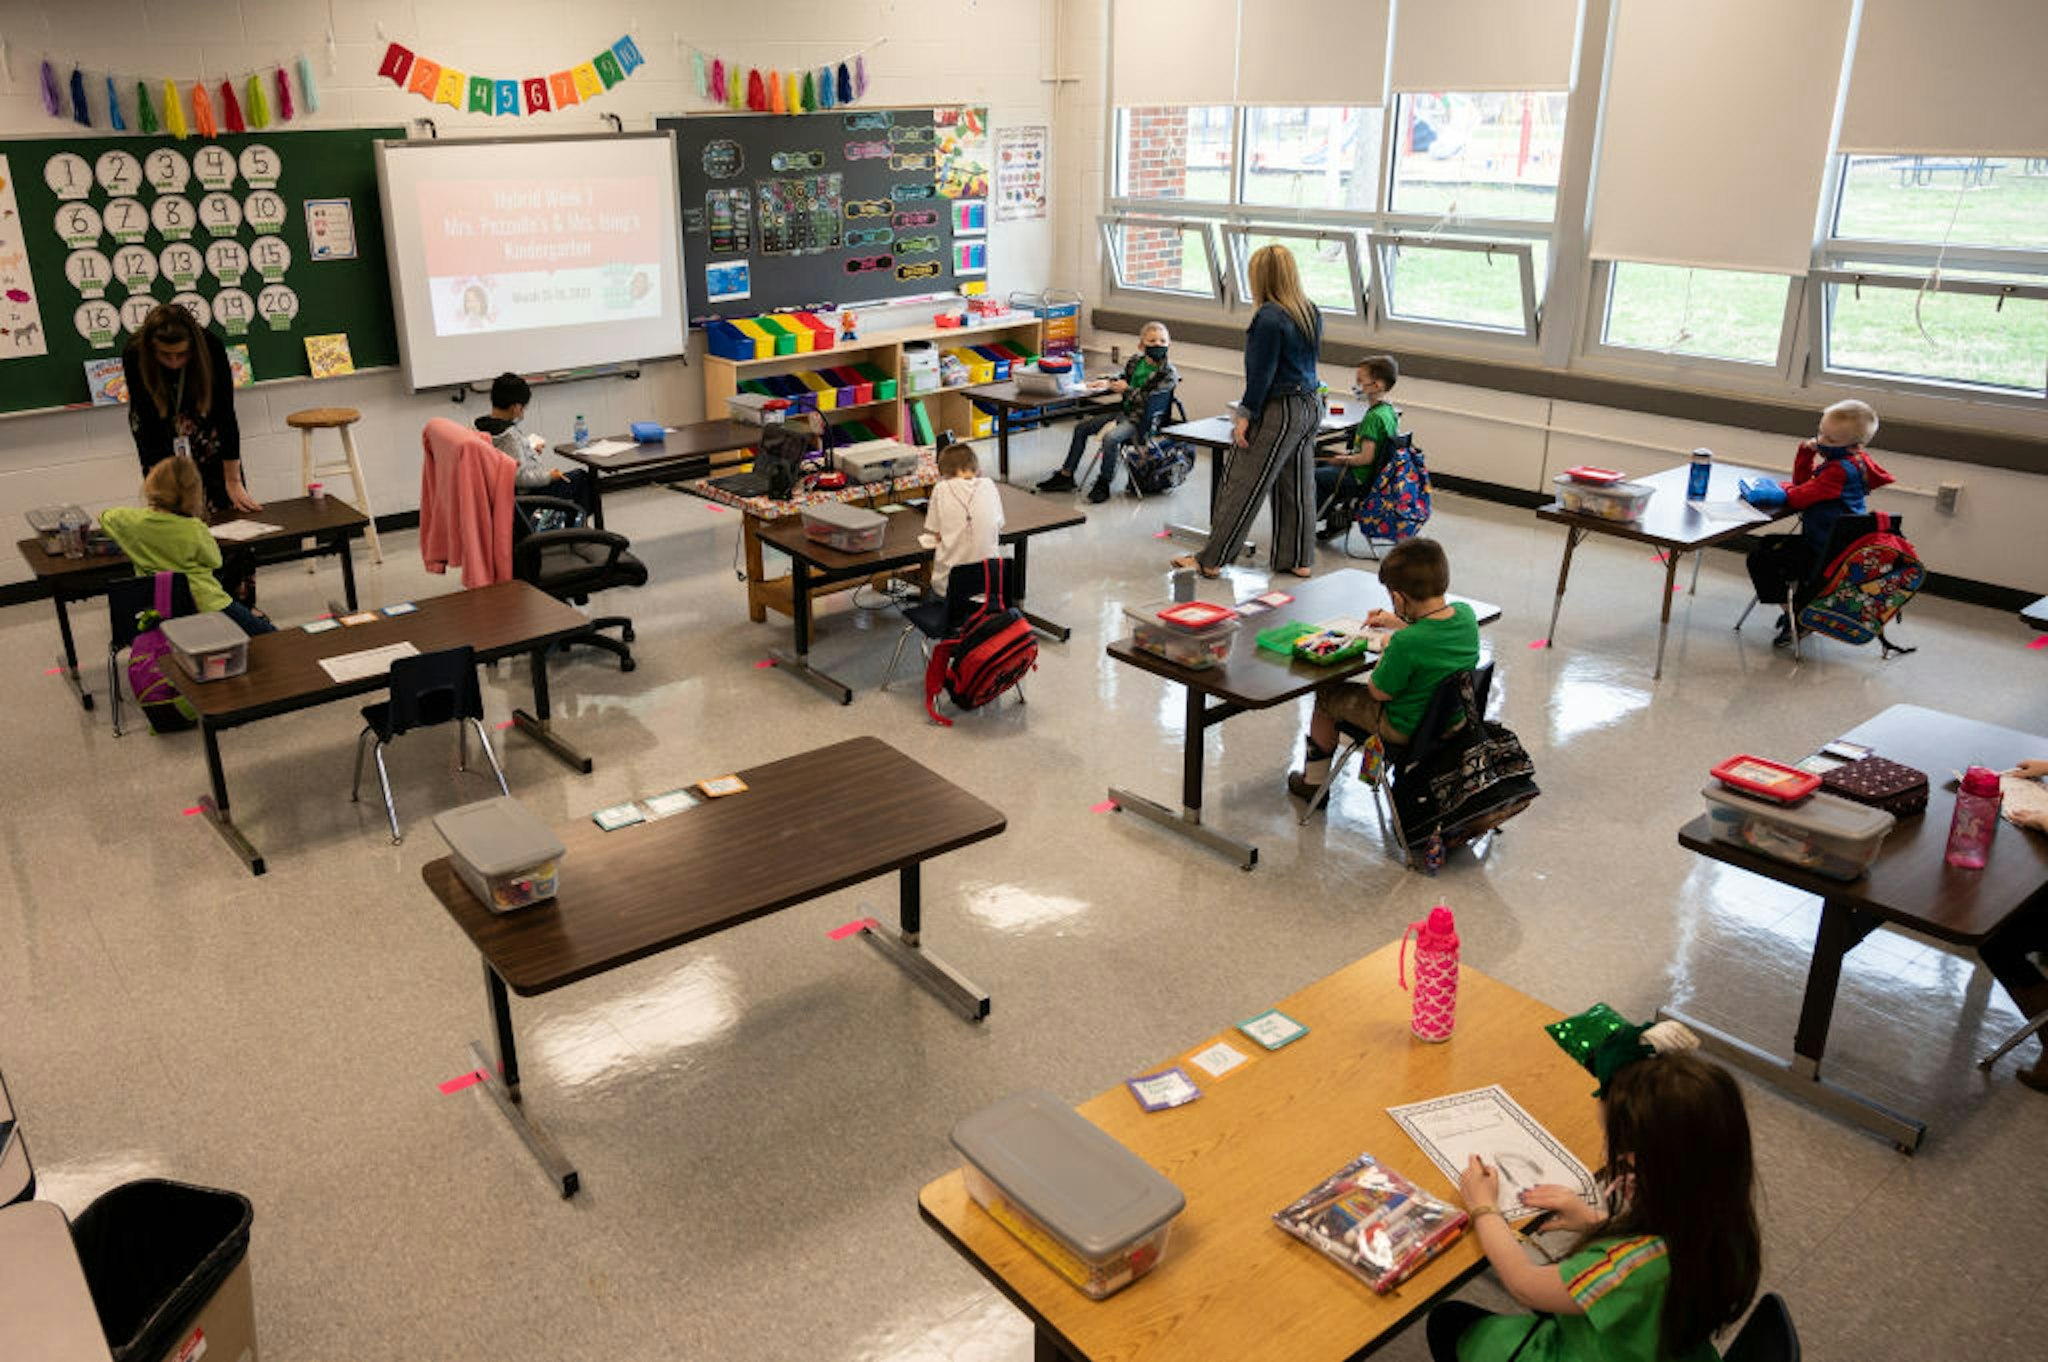 LOUISVILLE, KY - MARCH 17: Students and teachers participate in a socially distanced classroom session at Medora Elementary School on March 17, 2021 in Louisville, Kentucky. Today marks the reopening of Jefferson County Public Schools for in-person learning with new COVID-19 procedures in place.